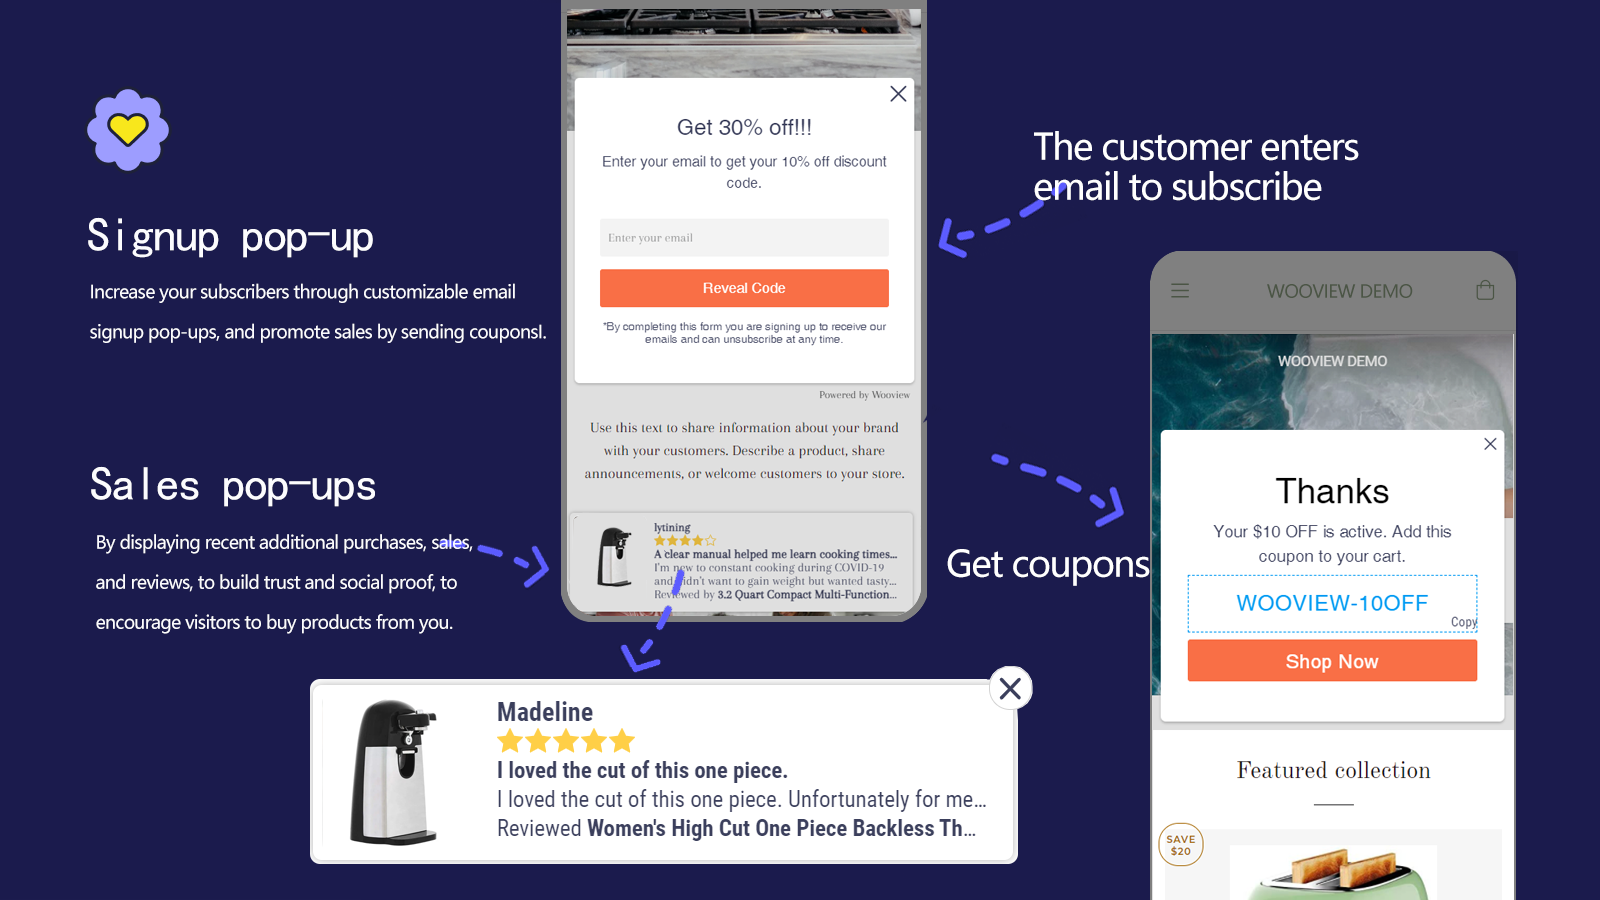 Popup increase your subscribers through customizable email